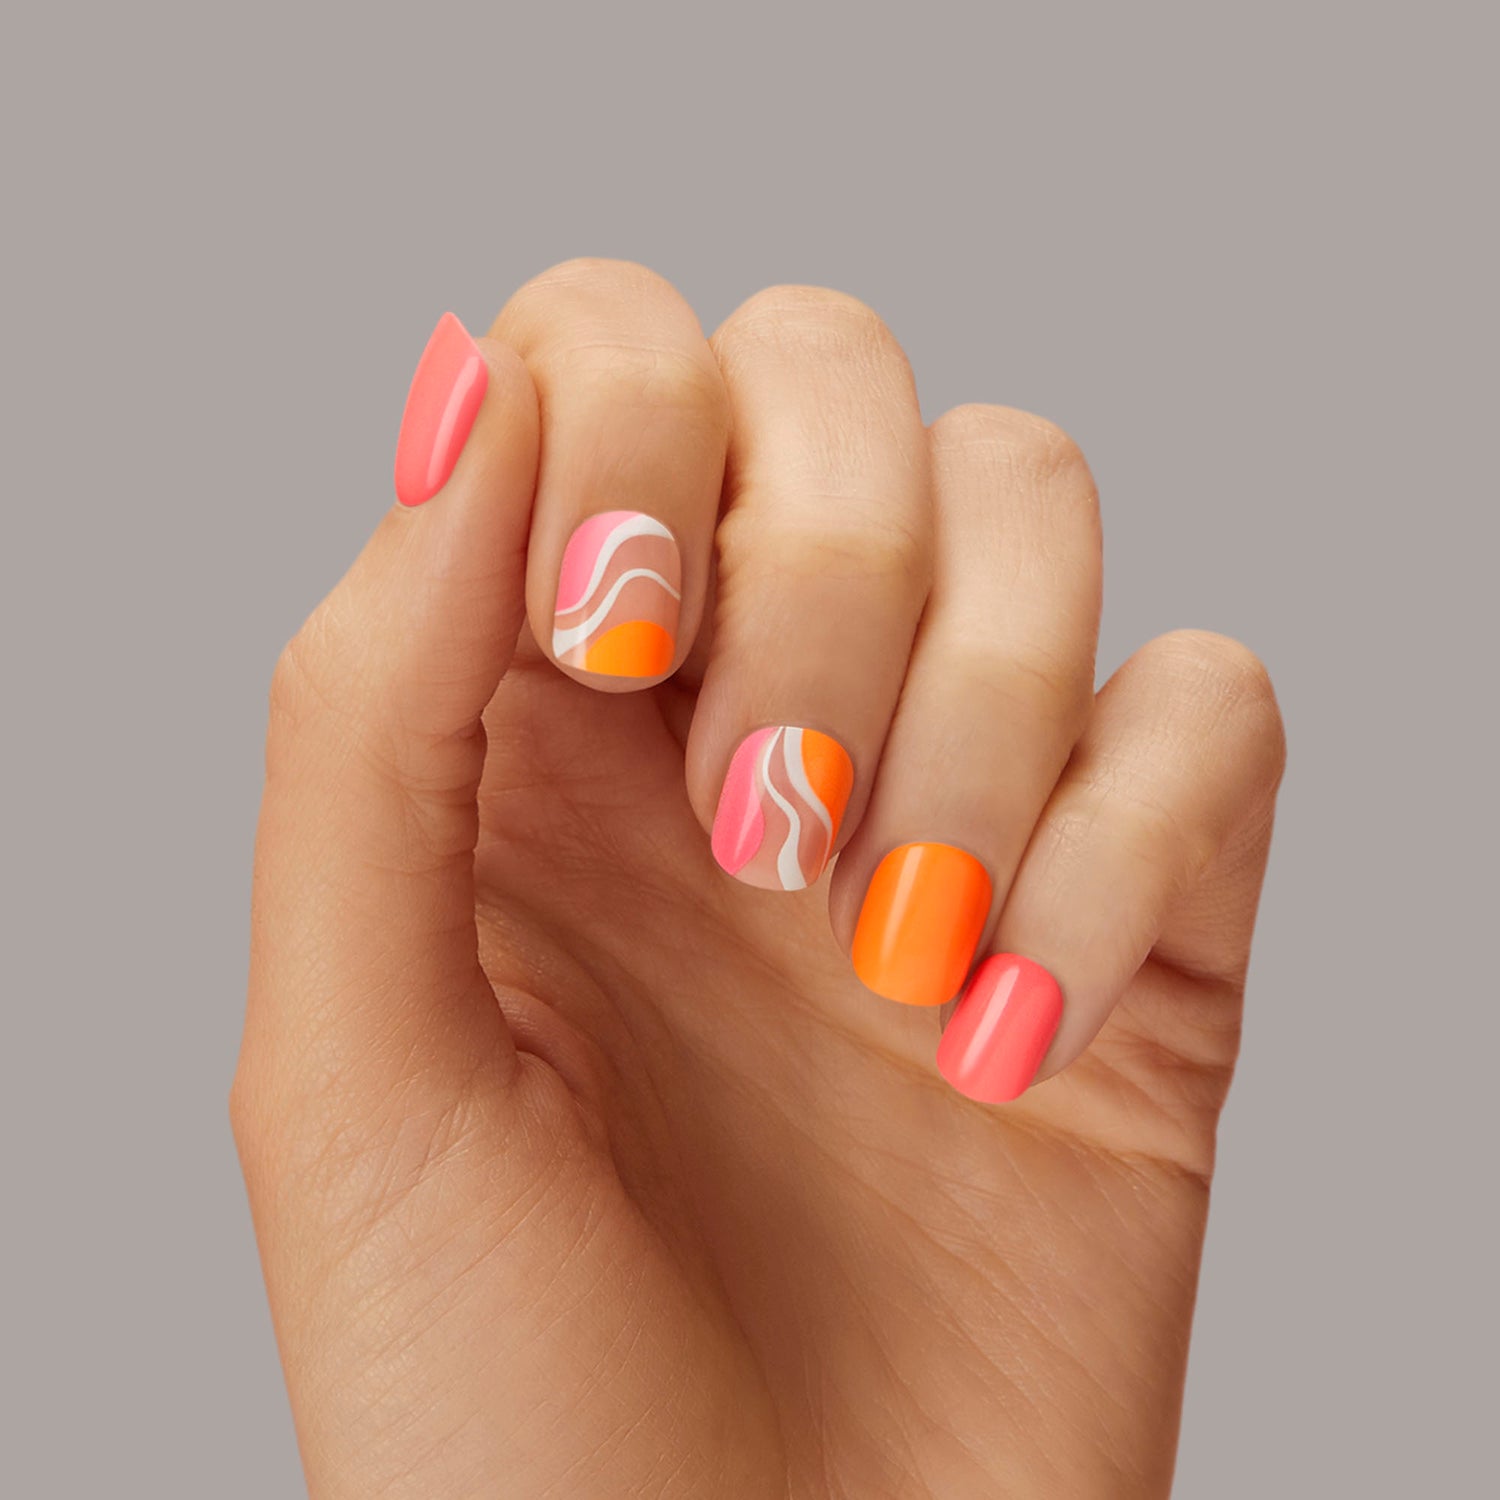 Medium length, square shape, glossy finish. Neon pink, orange, and sheer nude press-on gel nails 